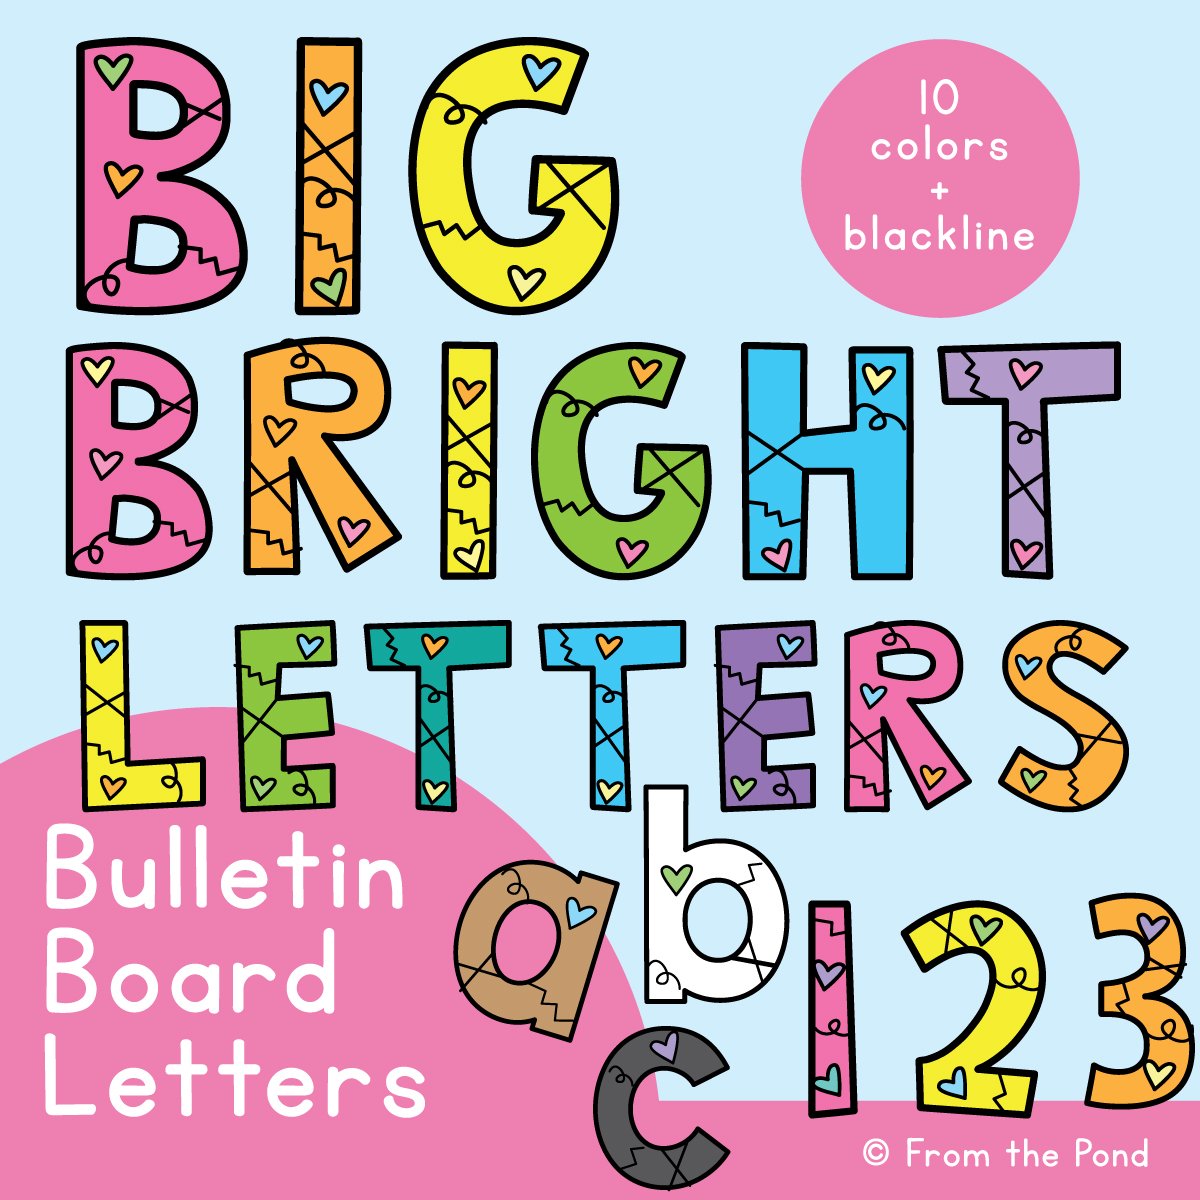 Bulletin board letters for the classroom - just print and display